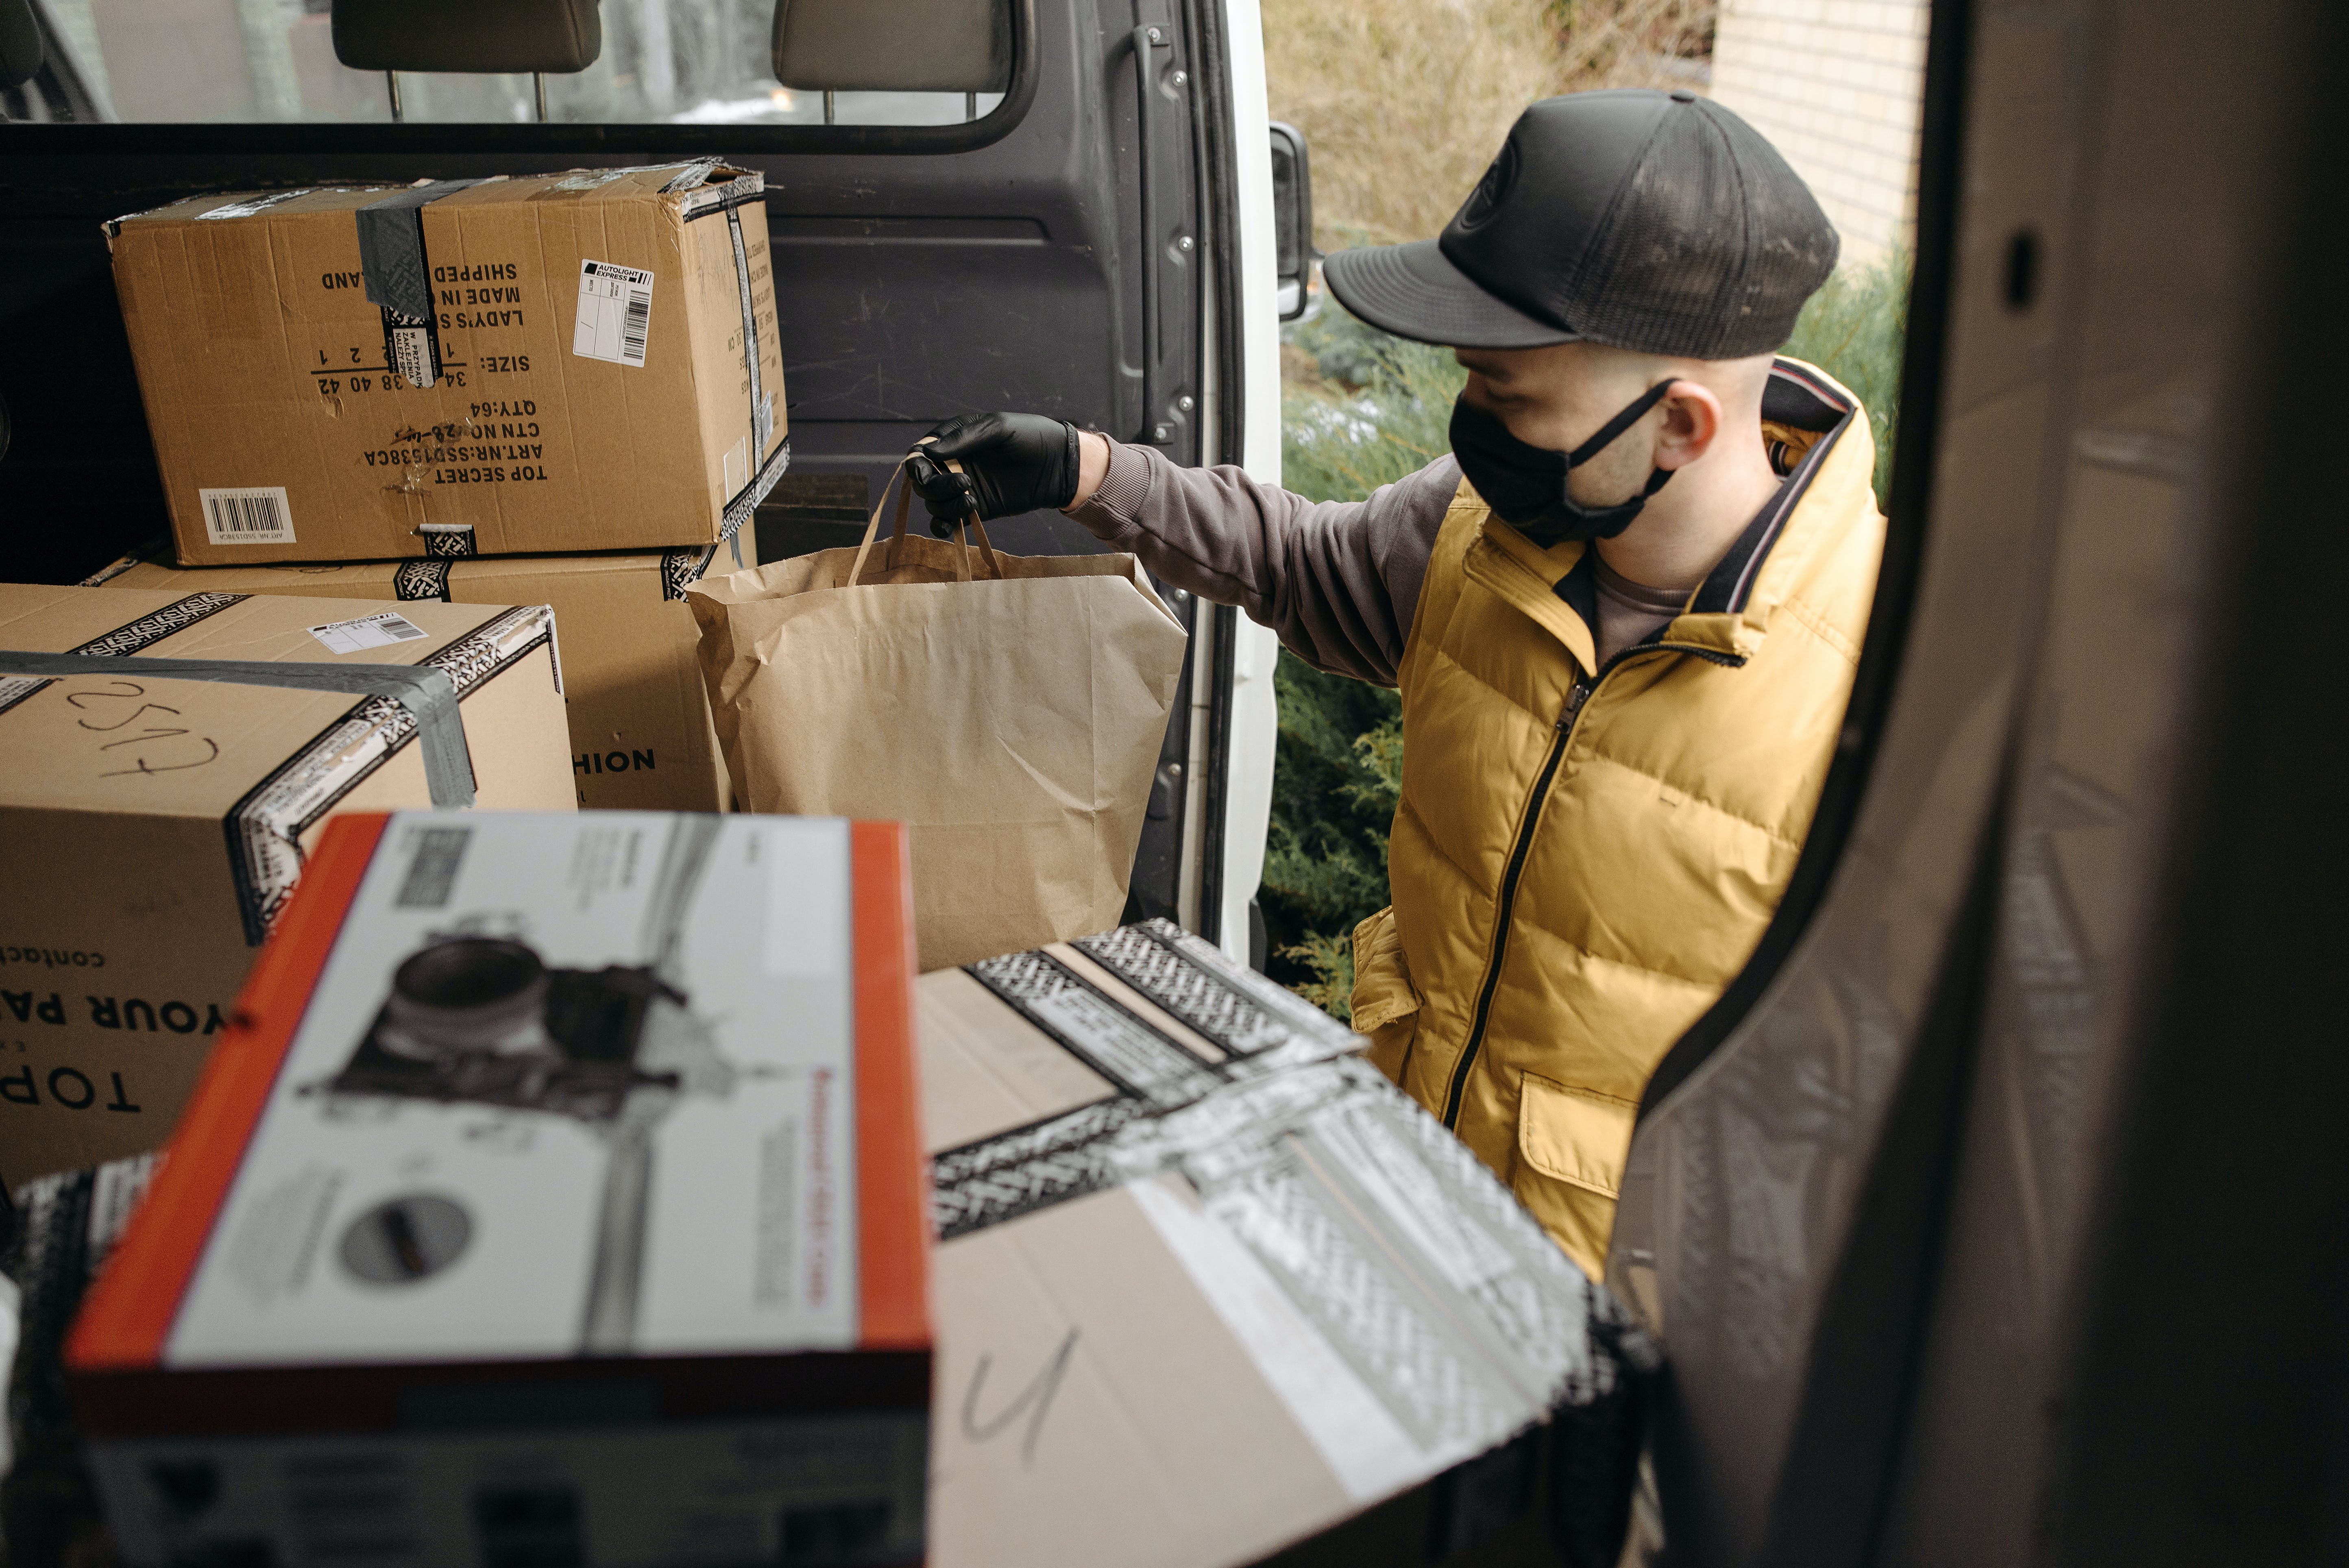 A delivery guy holding a package. | Source: Pexels